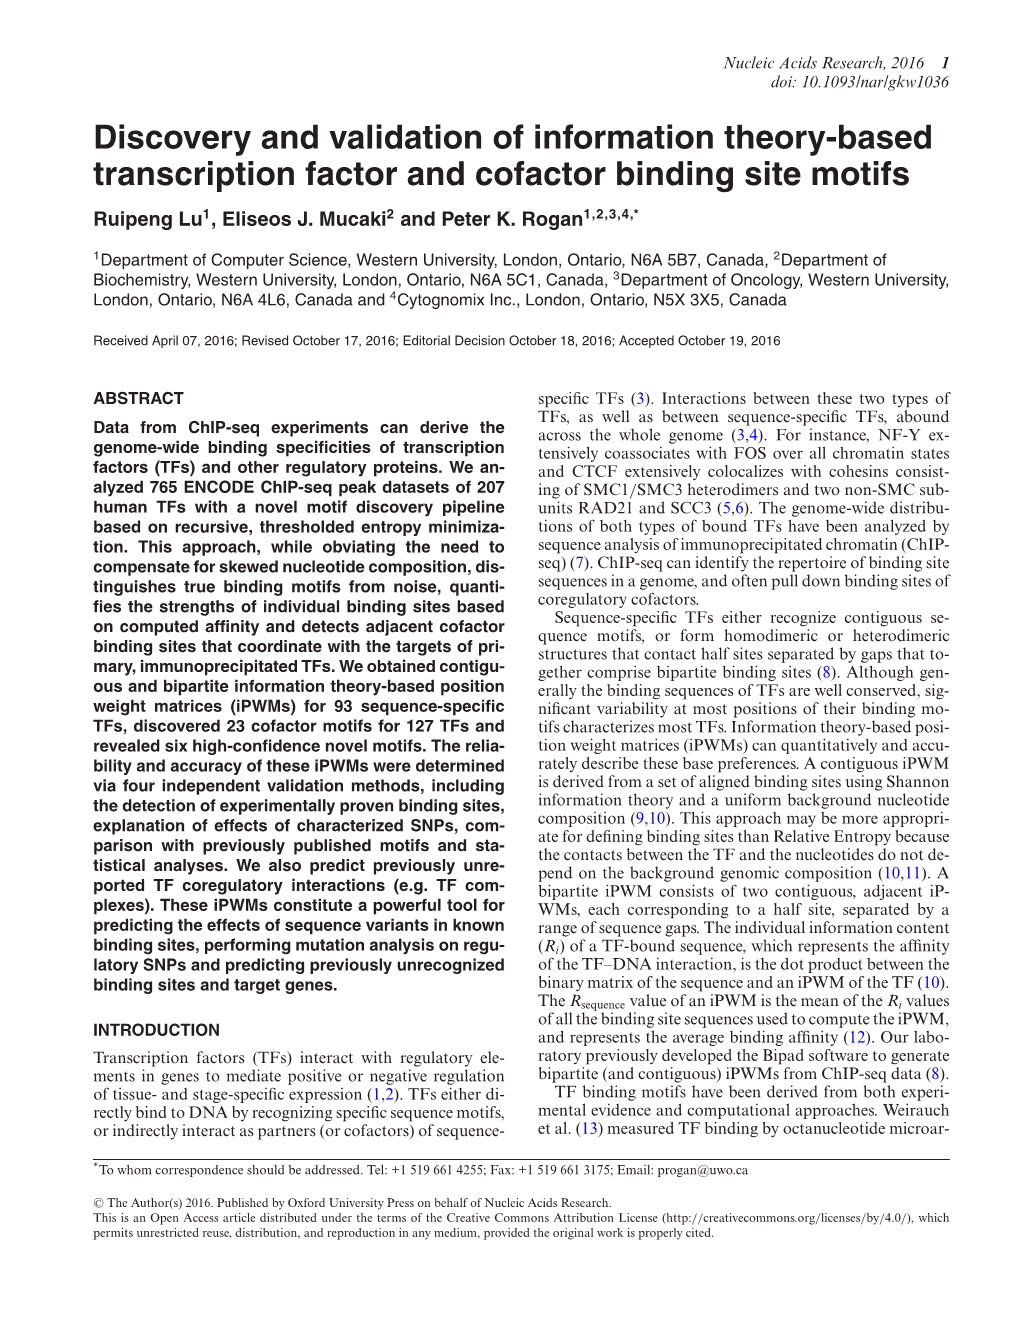 Discovery and Validation of Information Theory-Based Transcription Factor and Cofactor Binding Site Motifs Ruipeng Lu1, Eliseos J